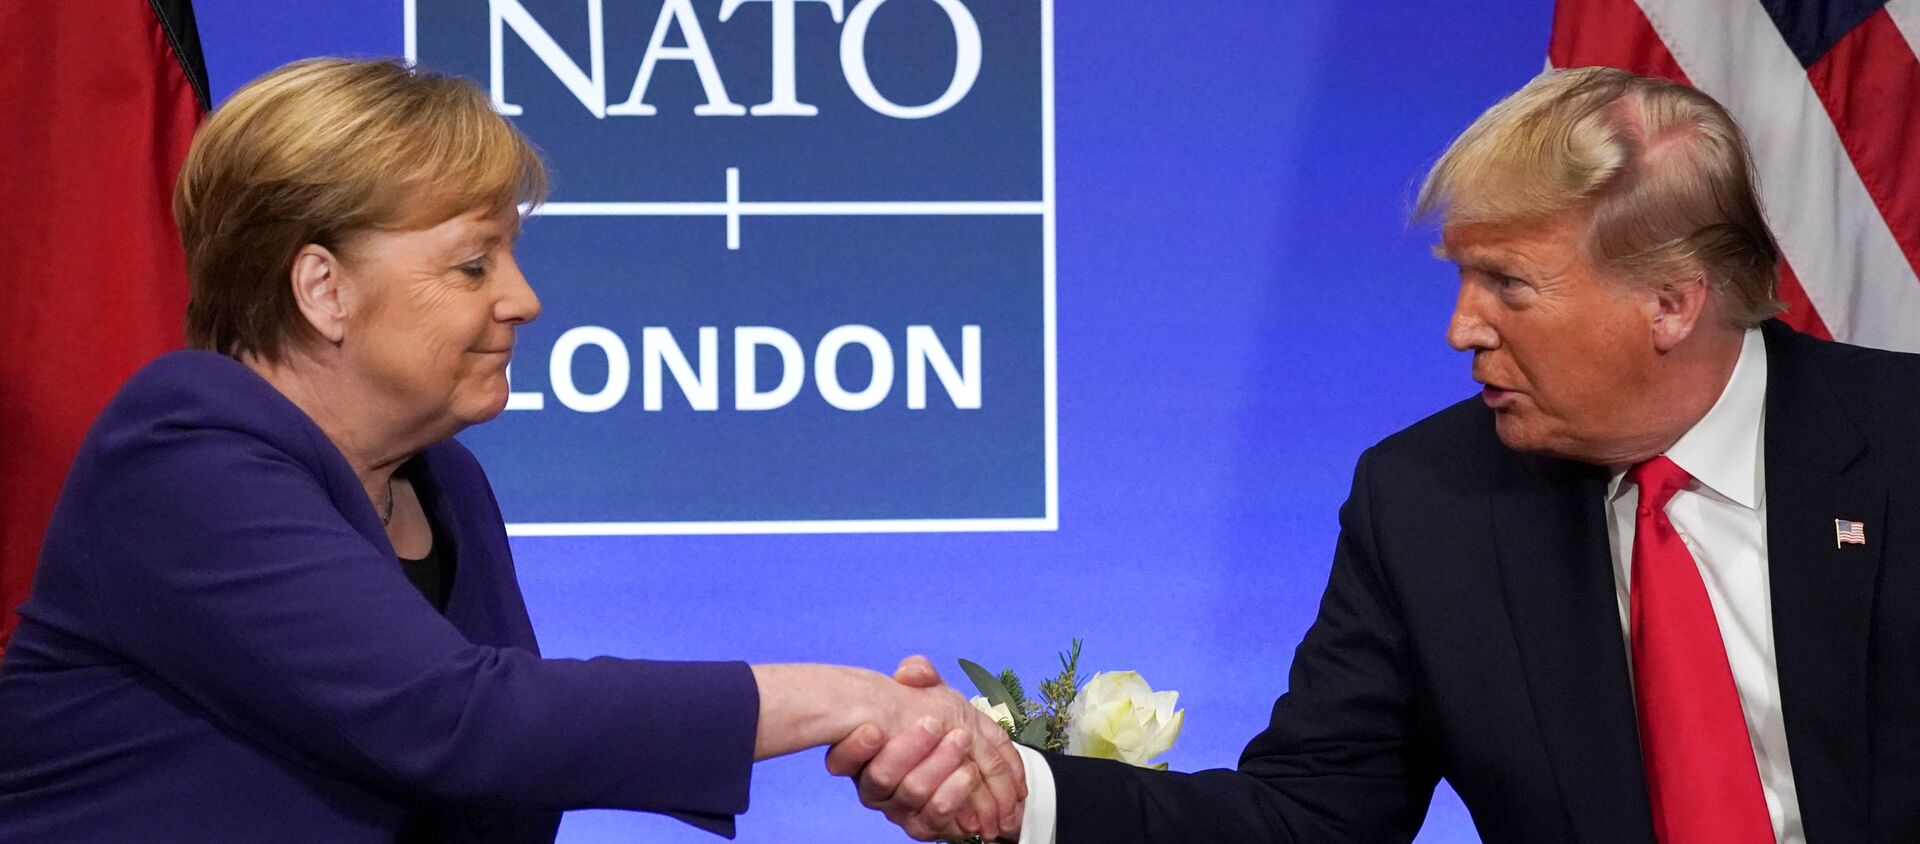 U.S. President Donald Trump shakes hands with Germany's Chancellor Angela Merkel during a bilateral meeting at the sidelines of the NATO summit in Watford, Britain, December 4, 2019. REUTERS/Kevin Lamarque - Sputnik Türkiye, 1920, 11.07.2020